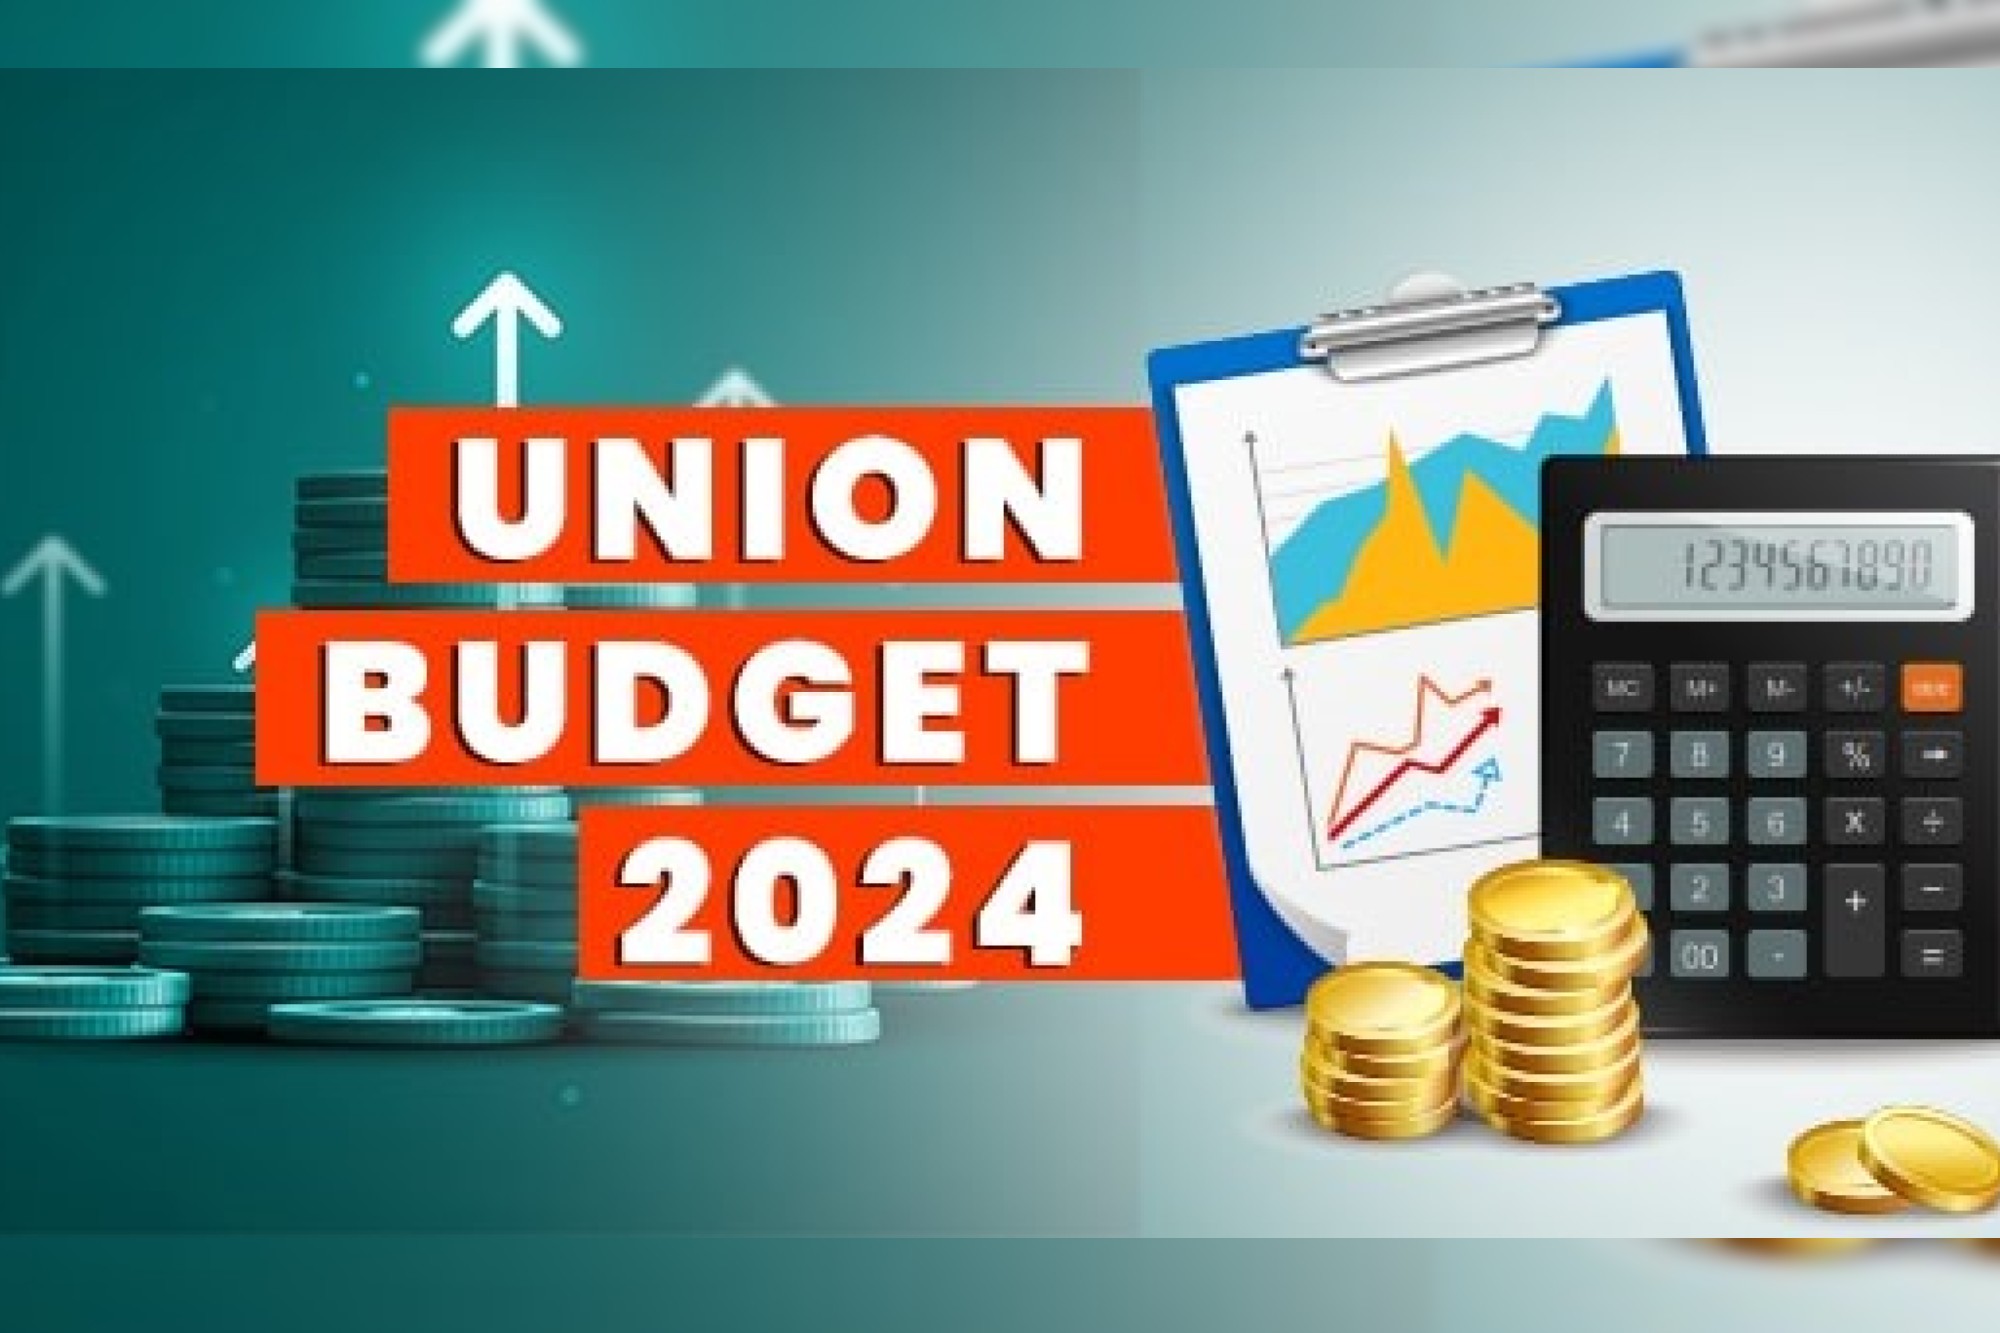 Finance Minister Nirmala Sitharaman unveiled the Union Budget 2024 in Parliament today. What are the pivotal highlights pertinent to the construction and infrastructure sector, and how will this budget propel industry growth? Let's delve into the reactions of industry experts.